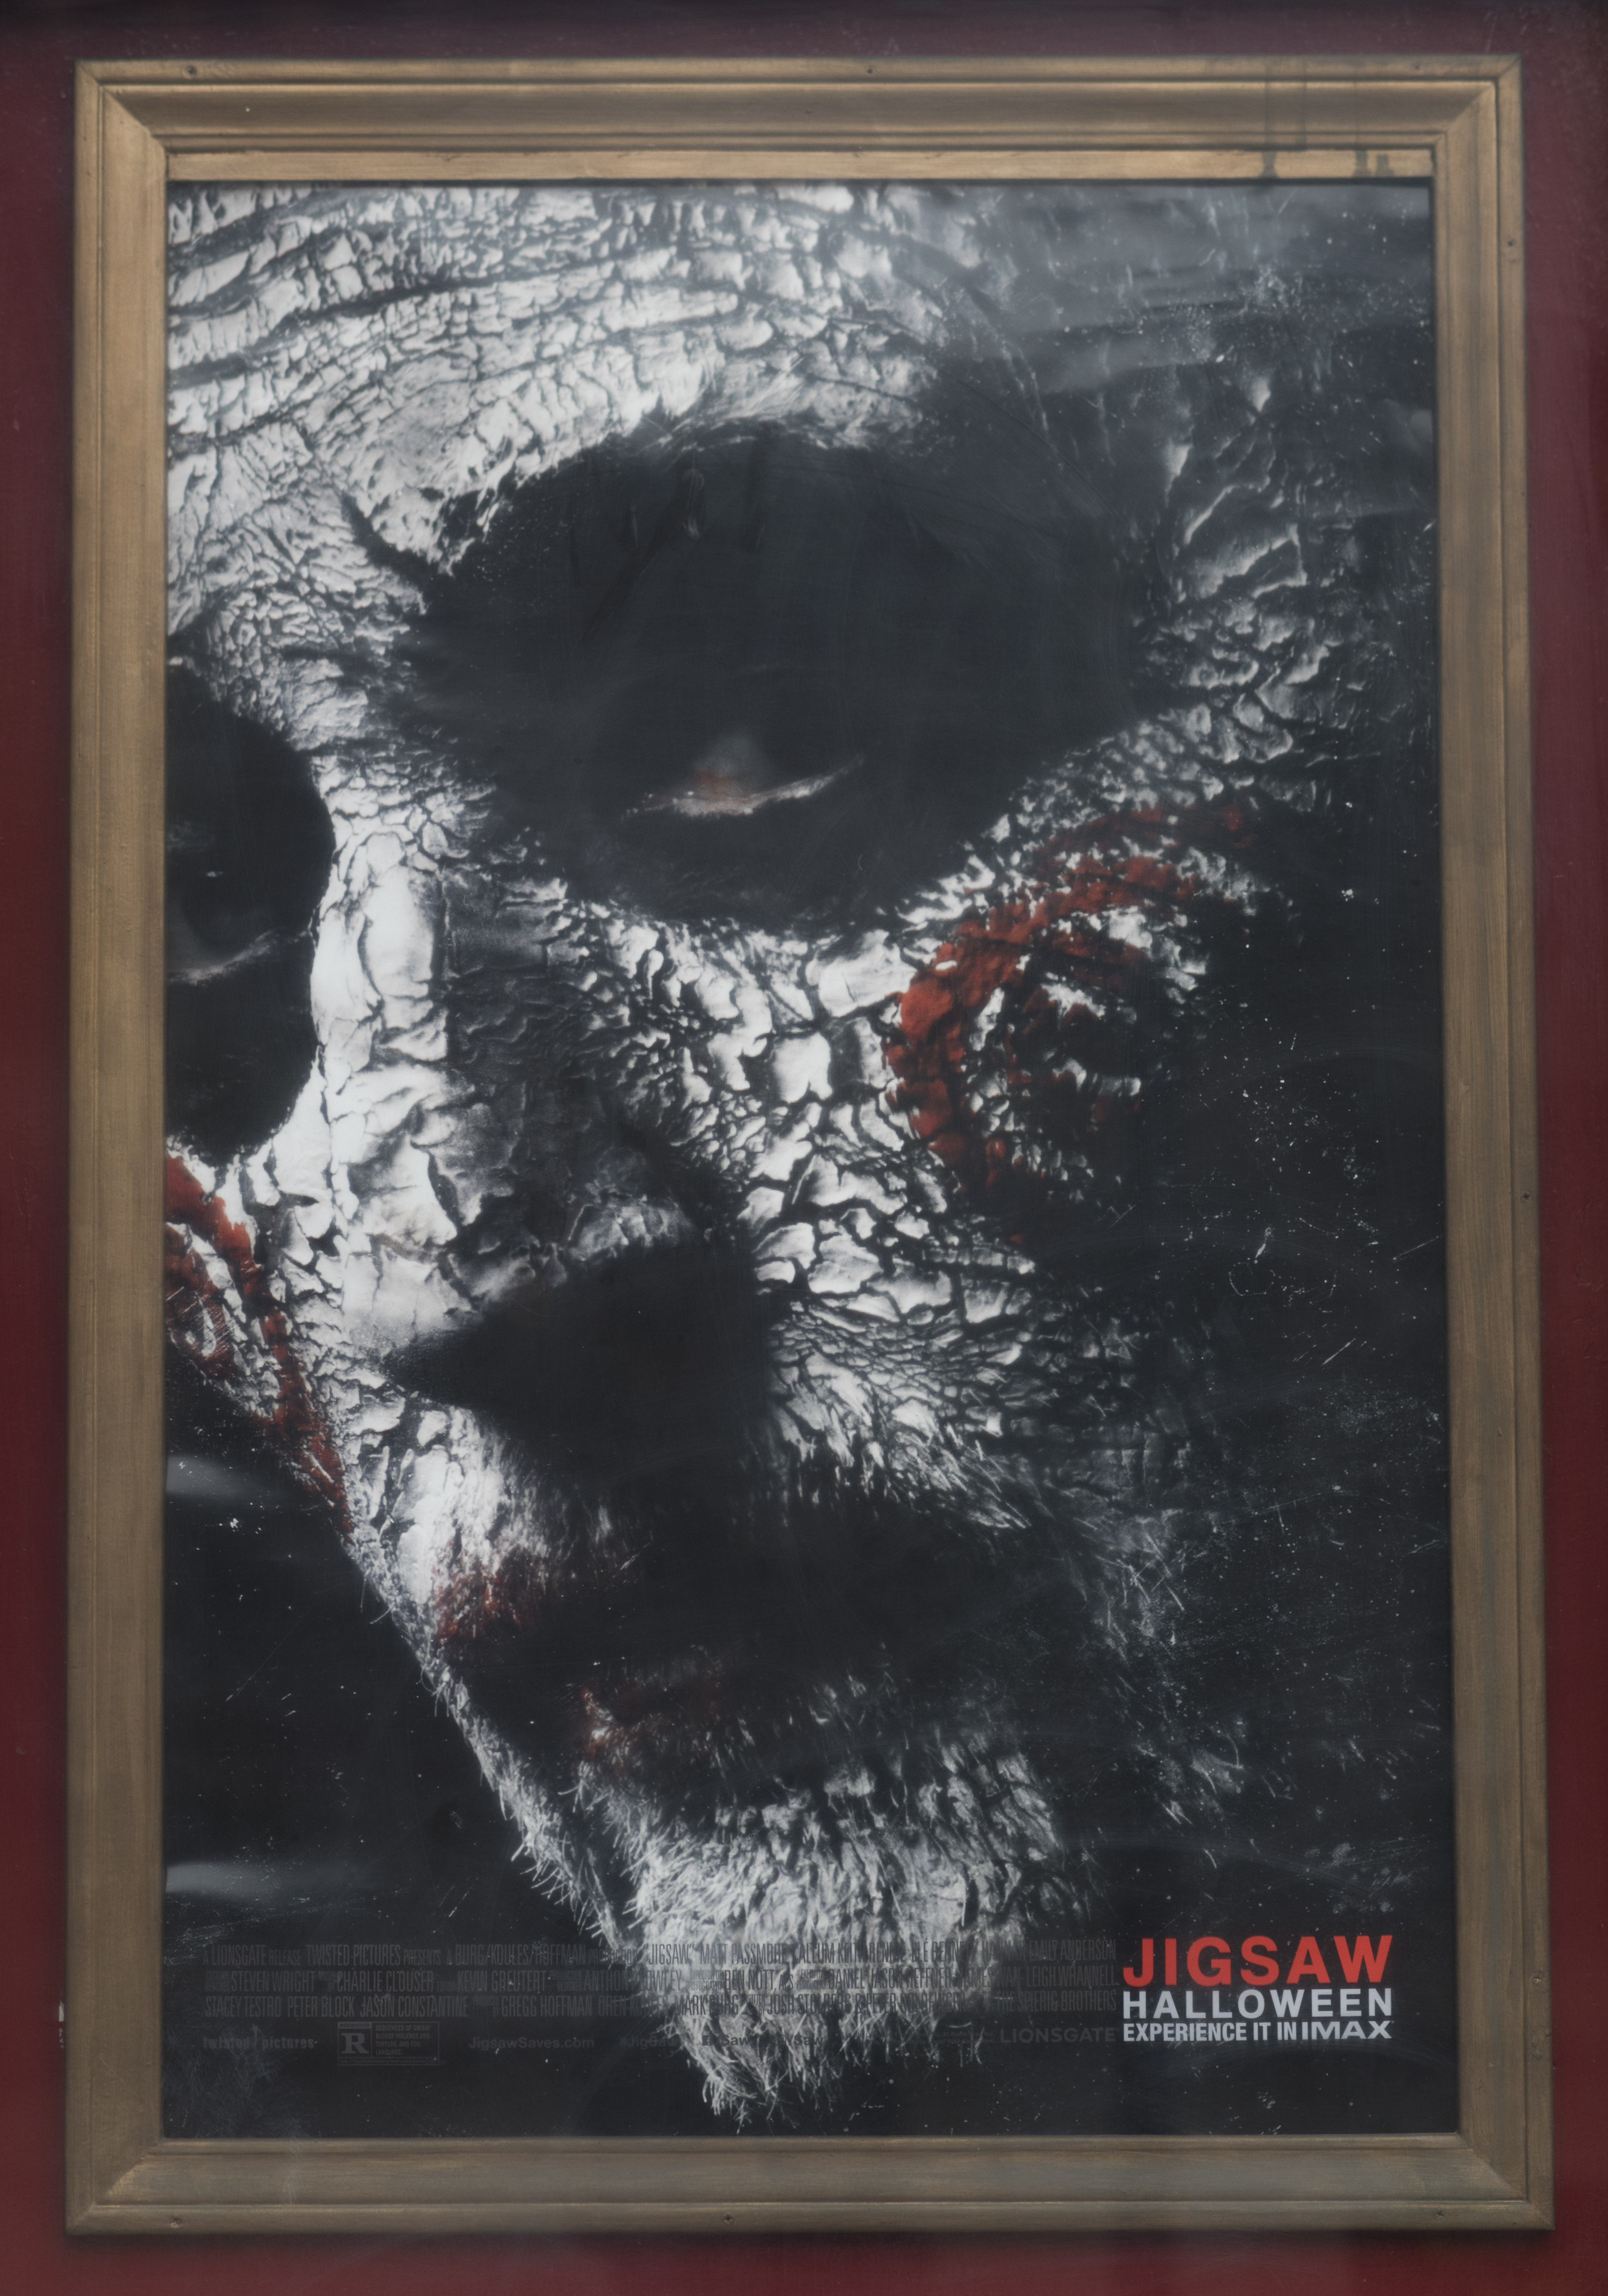 Jigsaw movie poster. (Cody Corrall, 14 East)